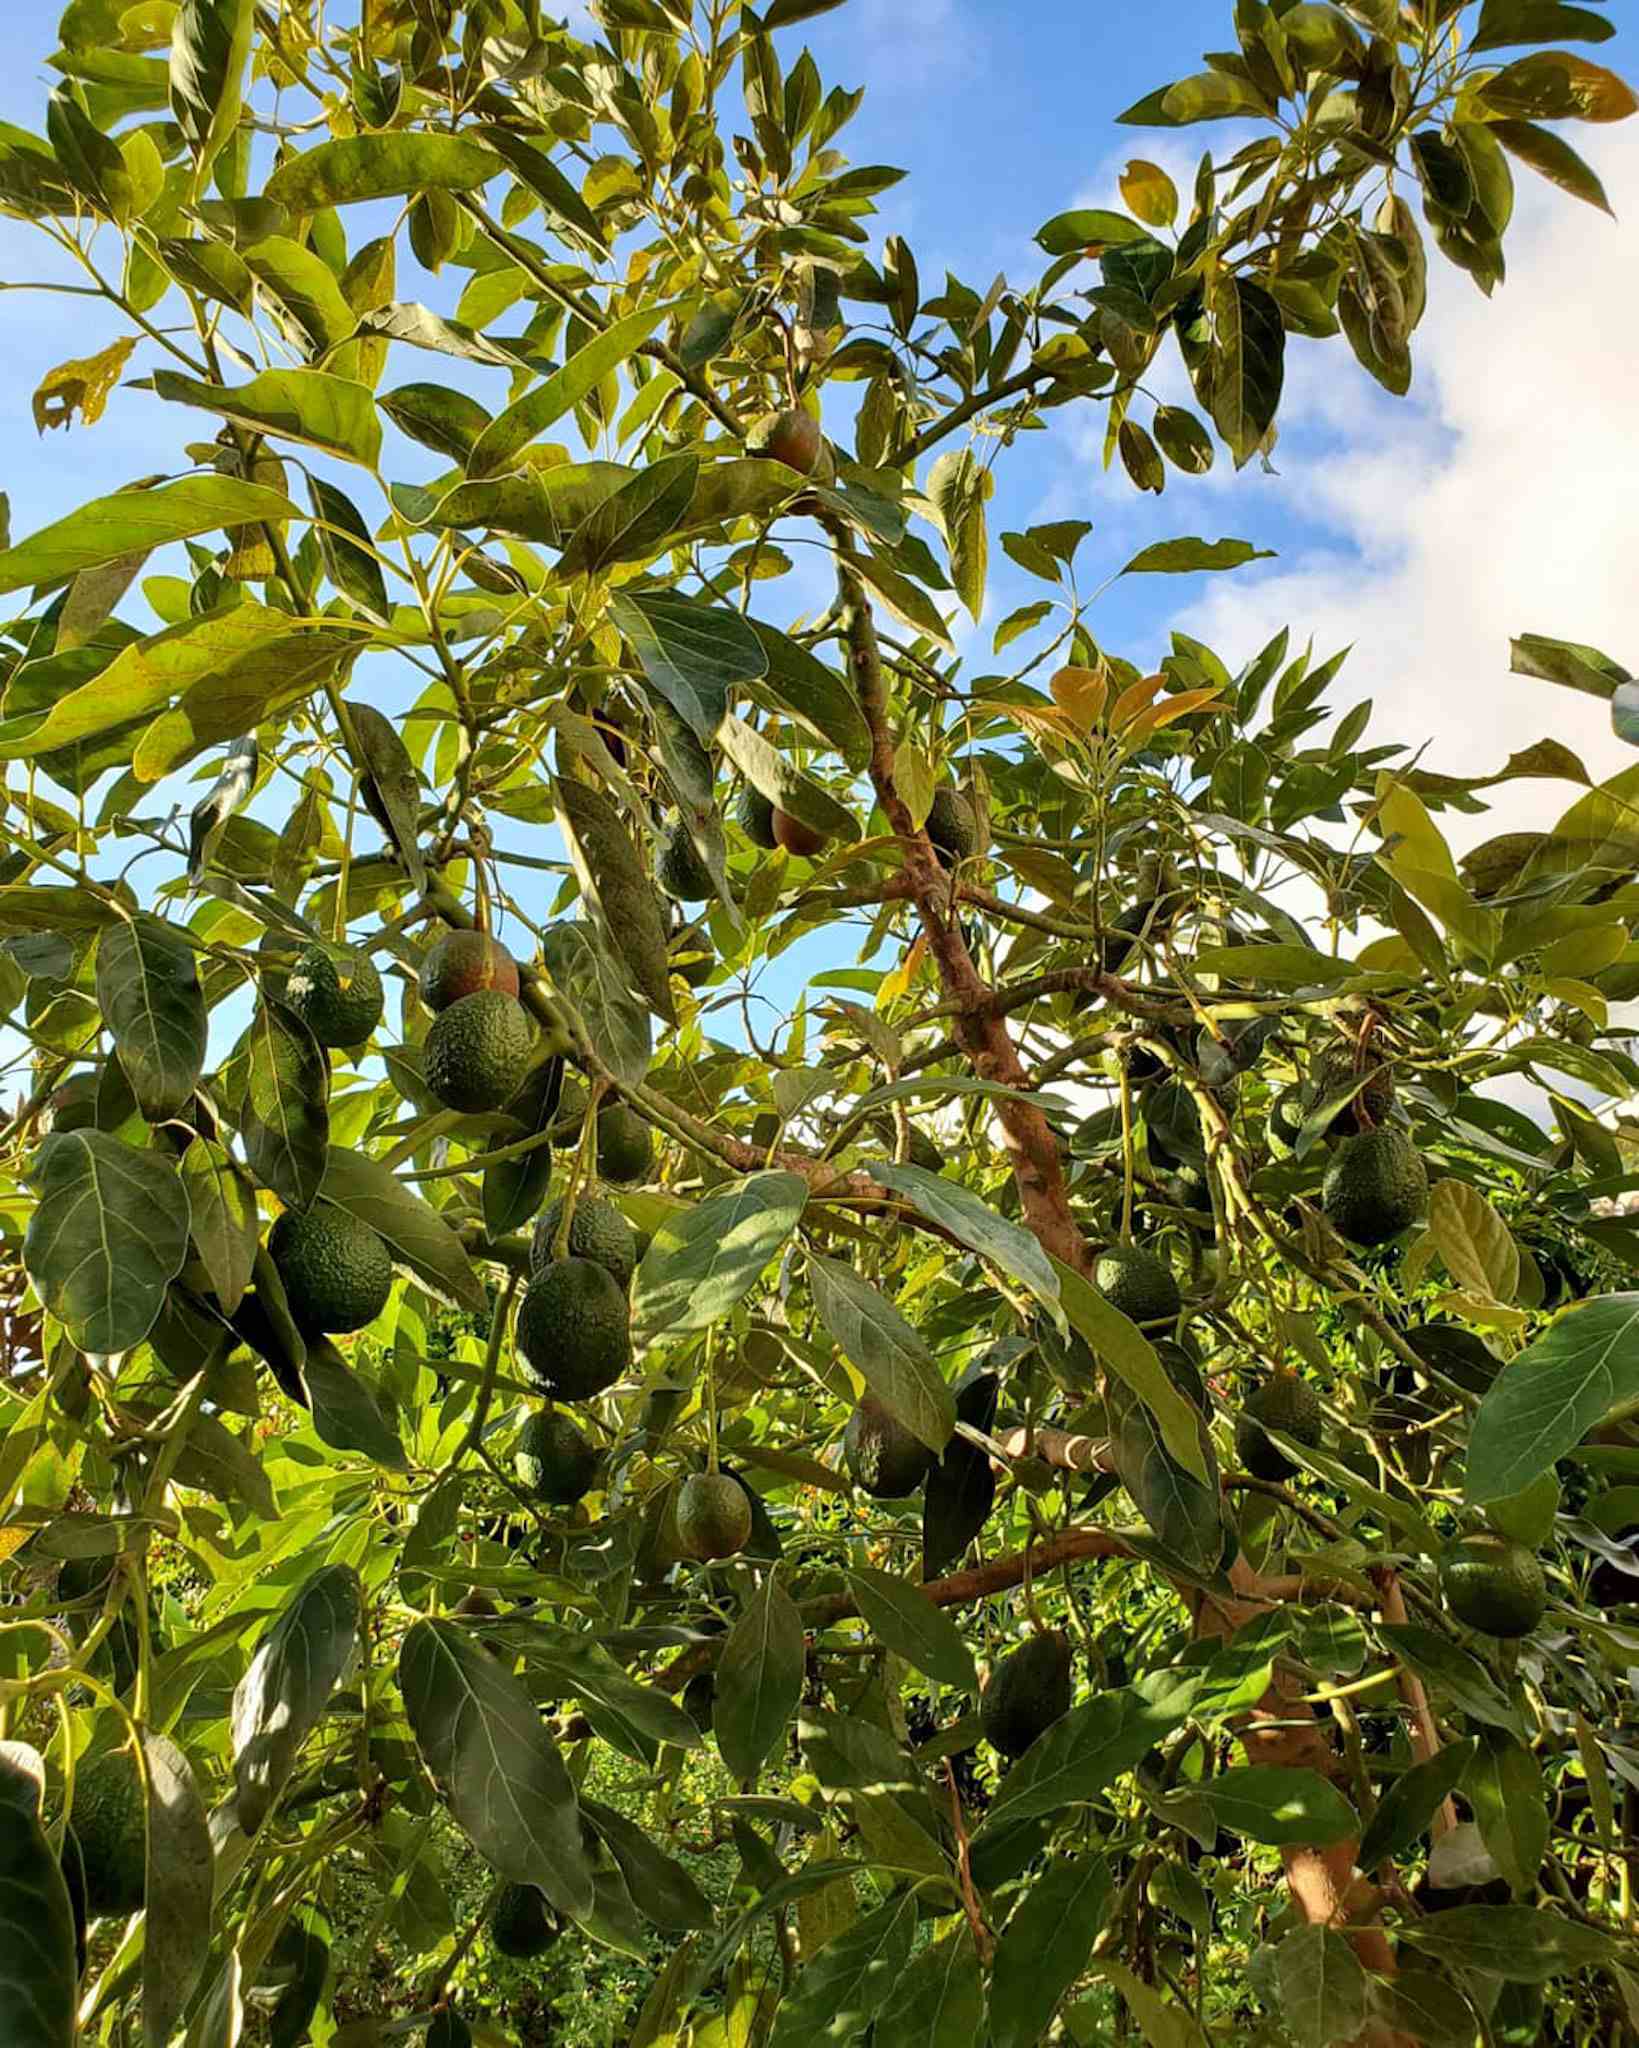 The understory of an avocado tree is shown, there are avocados hanging amongst the branches, littering the tree with fruit. When you grow avocados there is usually an abundance of fruit.